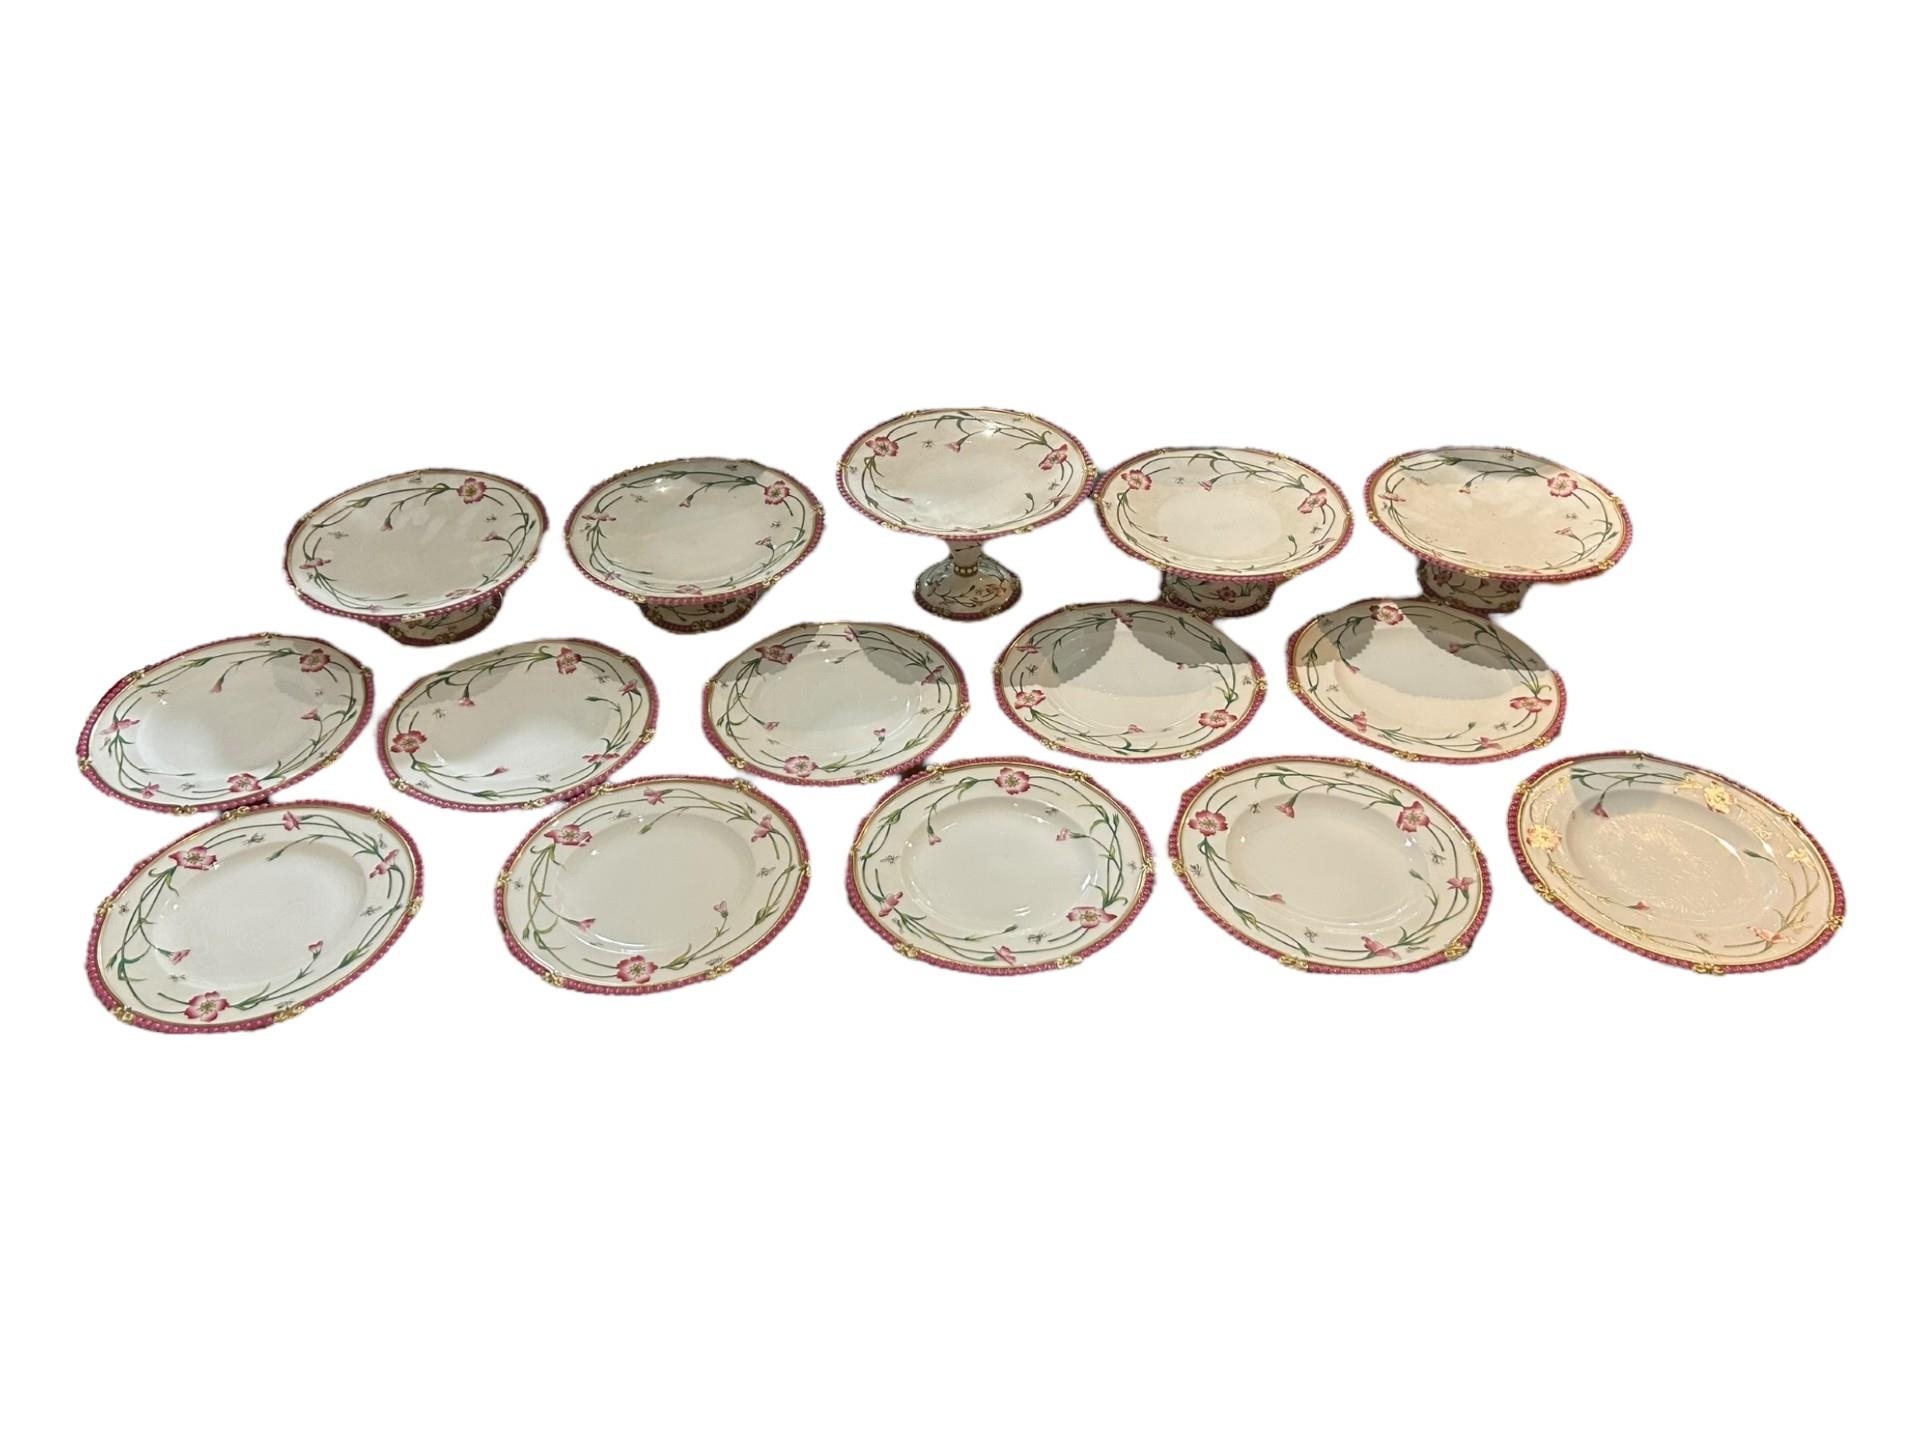 T.C. BROWN-WESTHEAD MOORE & CO., A 19TH CENTURY VICTORIAN PORCELAIN DESSERT TAZZAS AND PLATES